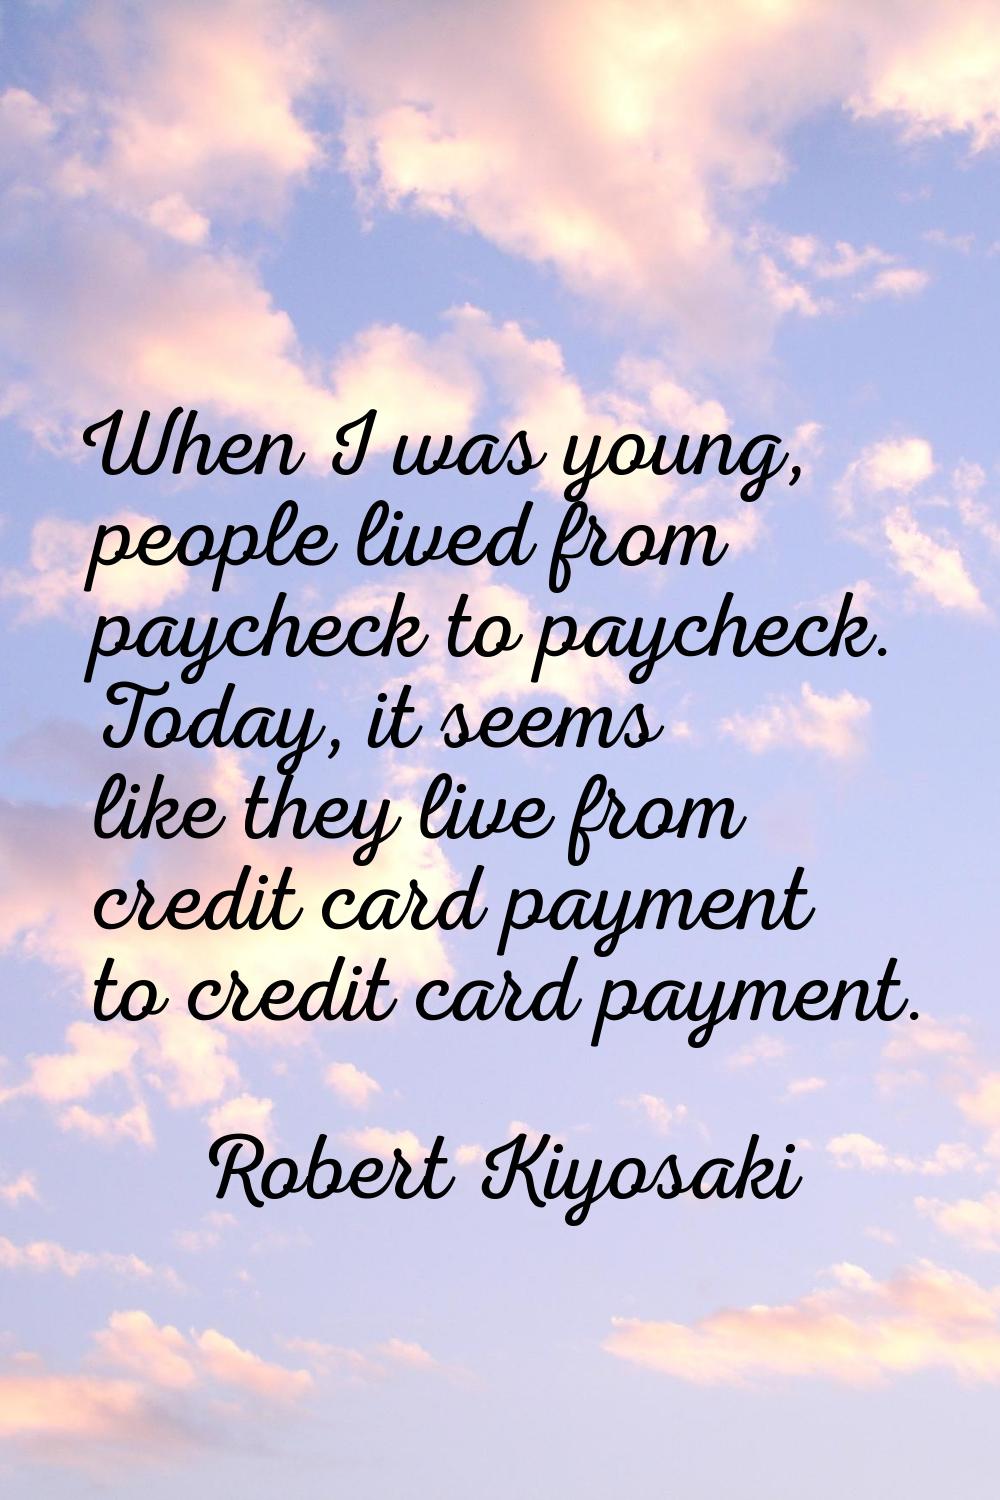 When I was young, people lived from paycheck to paycheck. Today, it seems like they live from credi